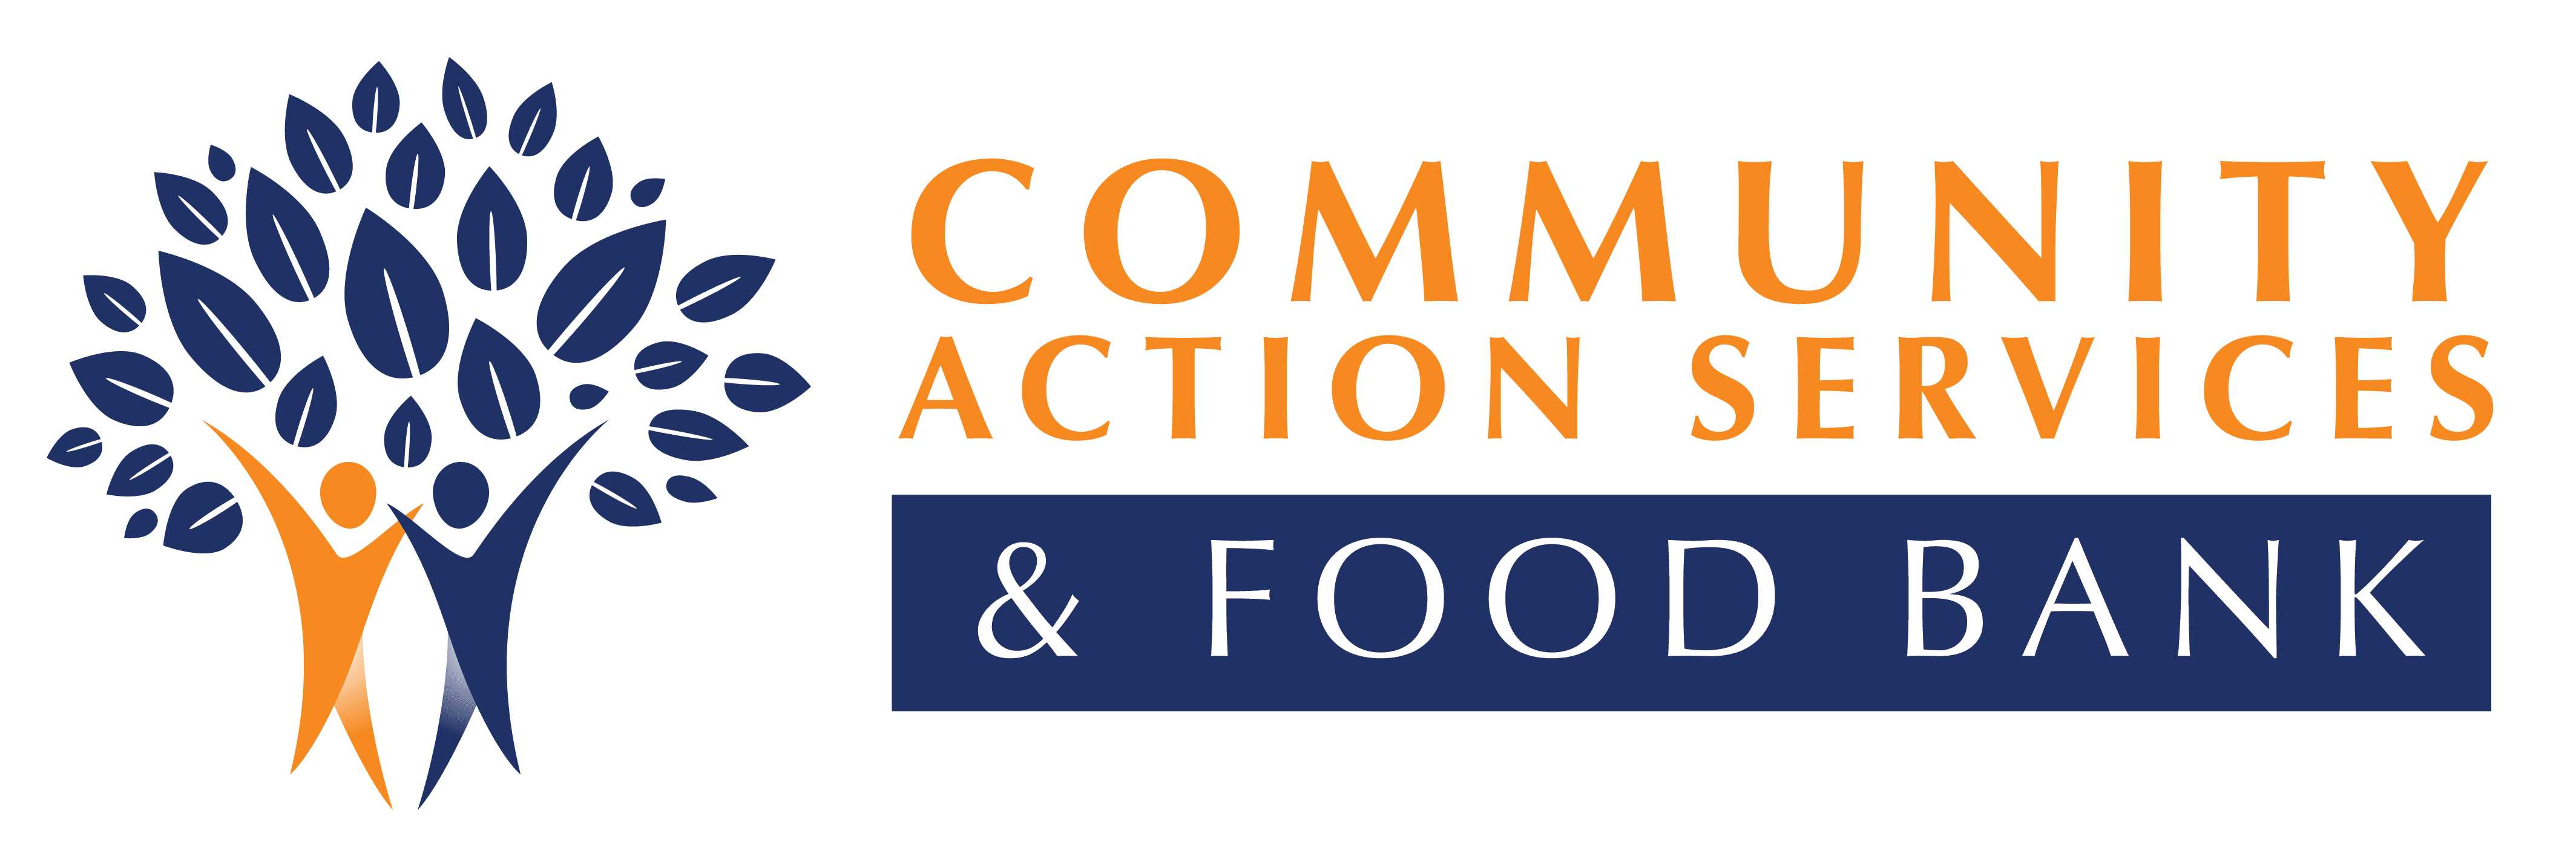 Community Action Services (CAS) and Provo